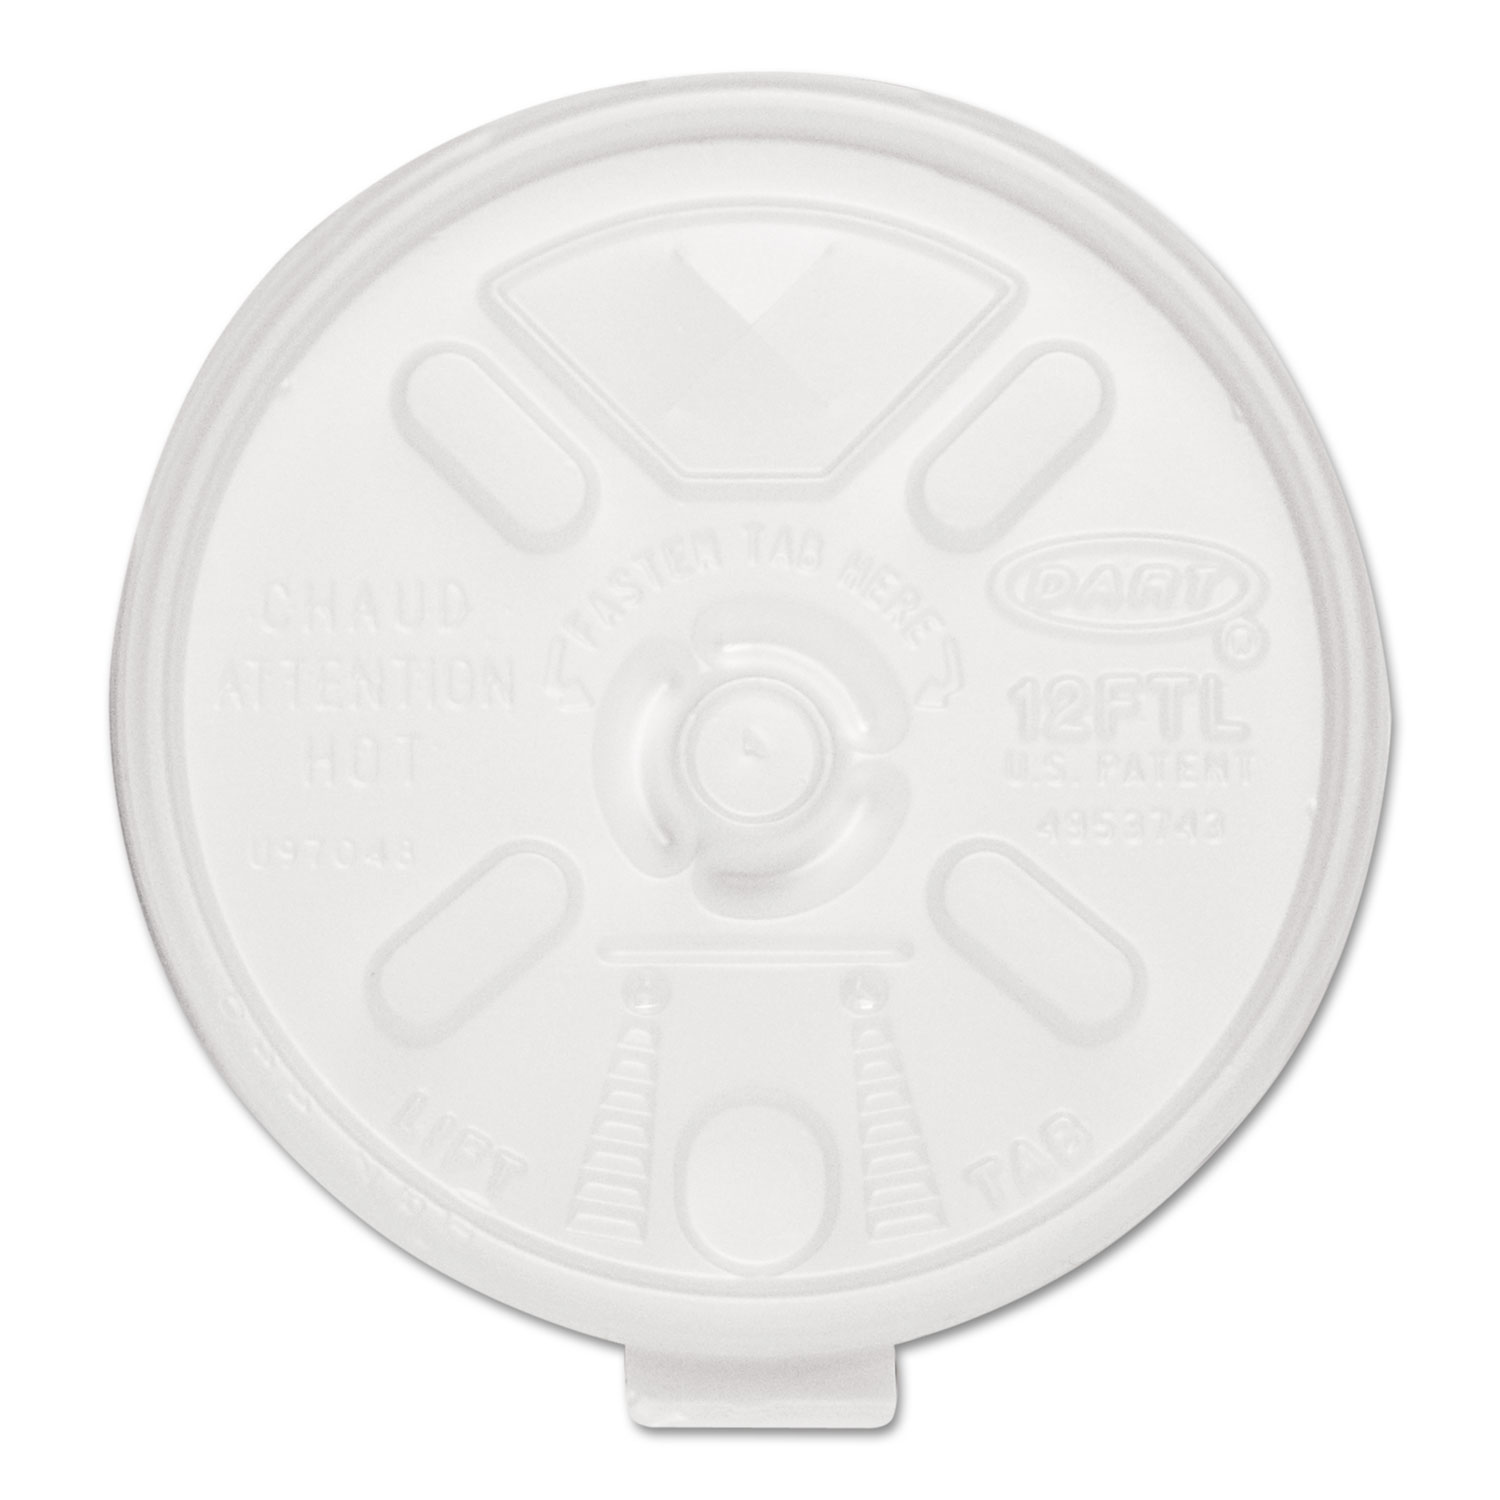 Lift n' Lock Plastic Hot Cup Lids, With Straw Slot, Fits 10 oz to 14 oz Cups, Translucent, 100/Sleeve, 10 Sleeves/Carton